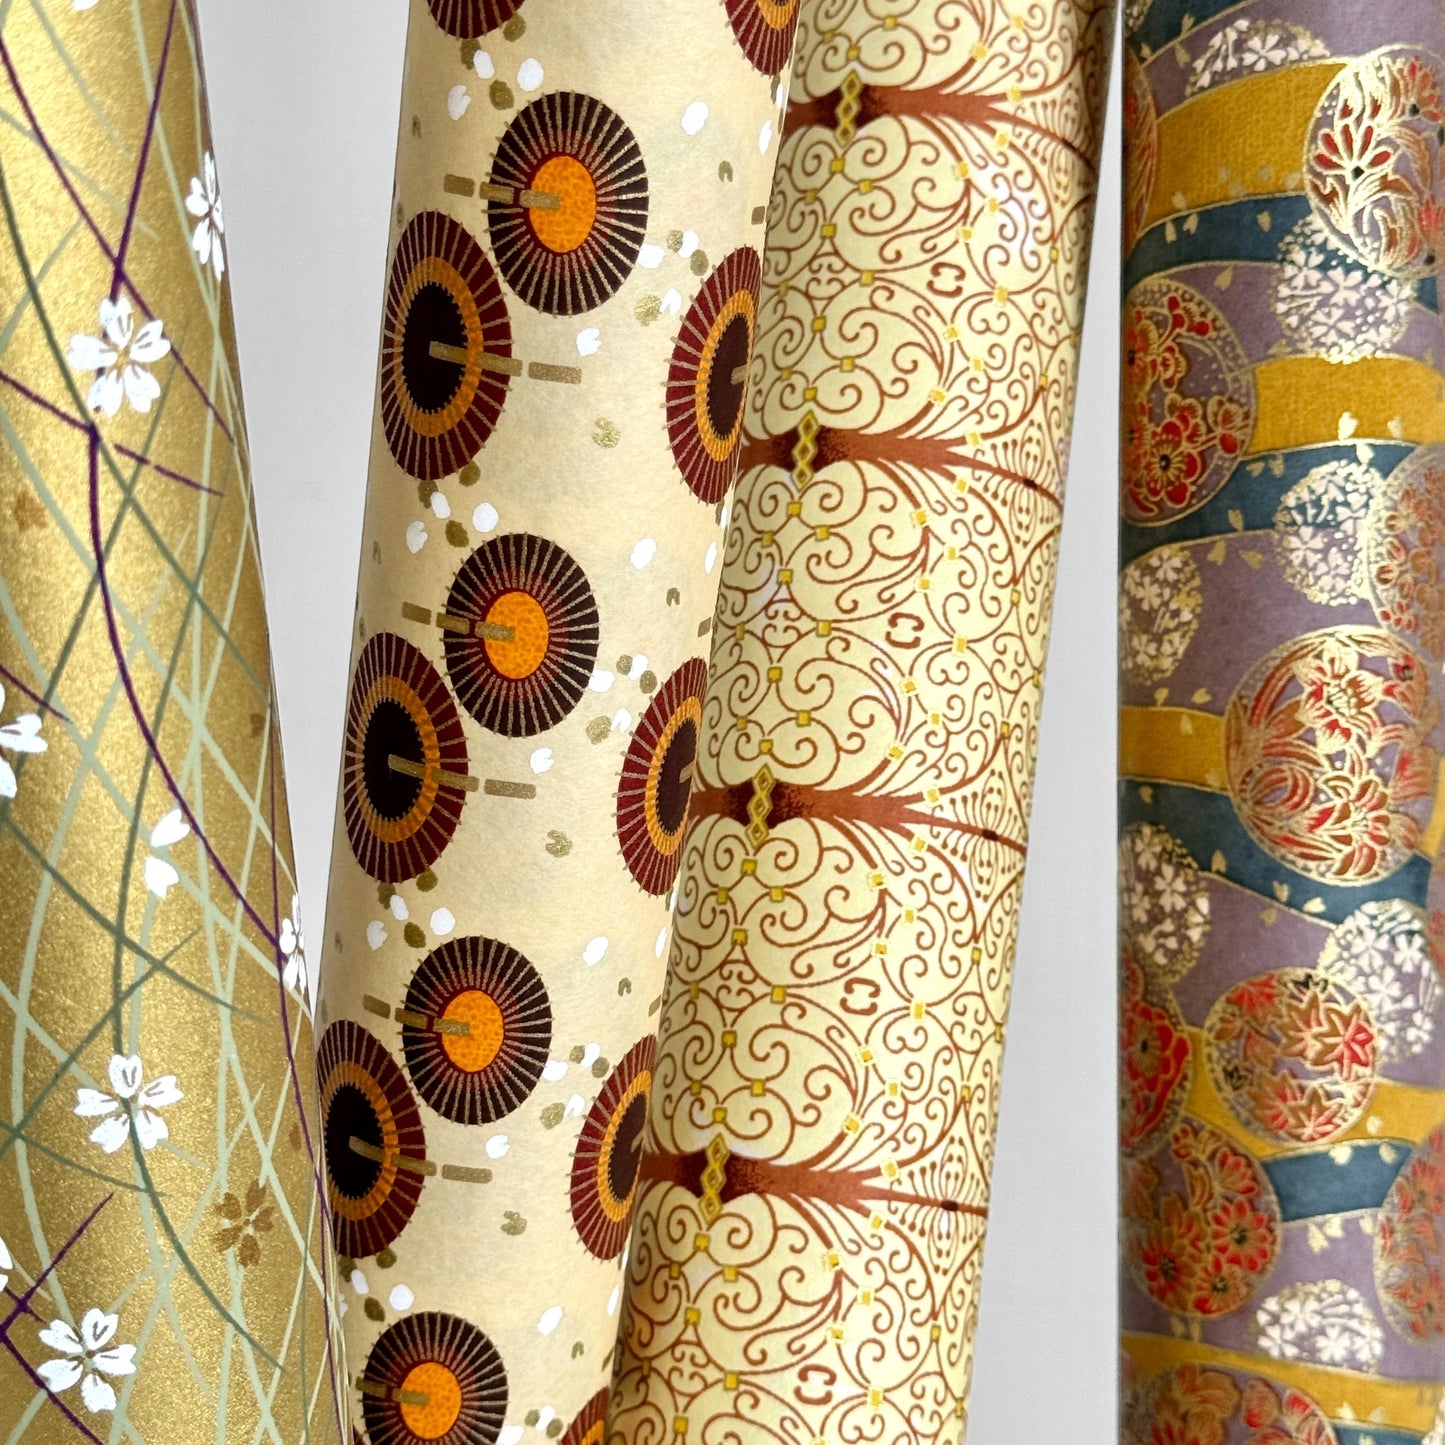 Japanese silkscreen chiyogami paper with a intricate filigree trellis design in brown with gold accent. Pictured with other designs